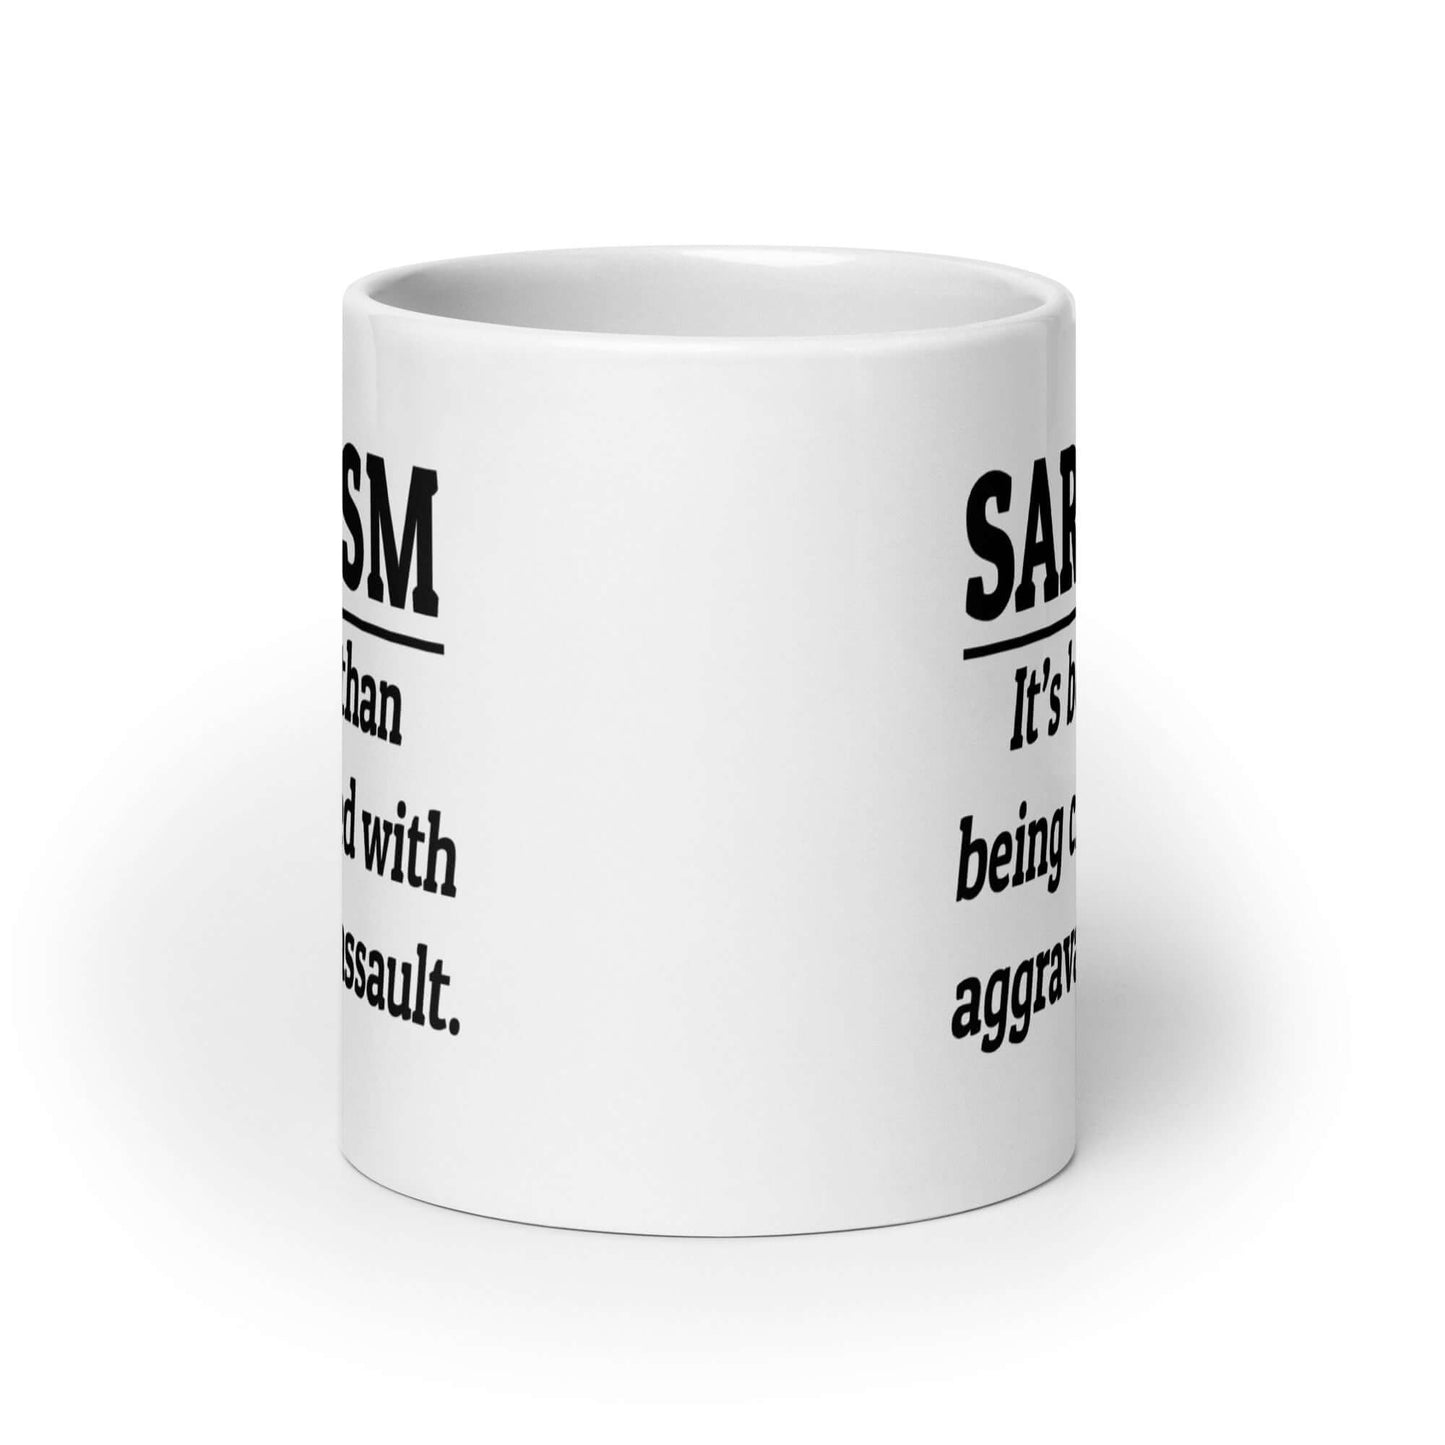 Sarcasm is better than being charged with aggravated assault funny mug